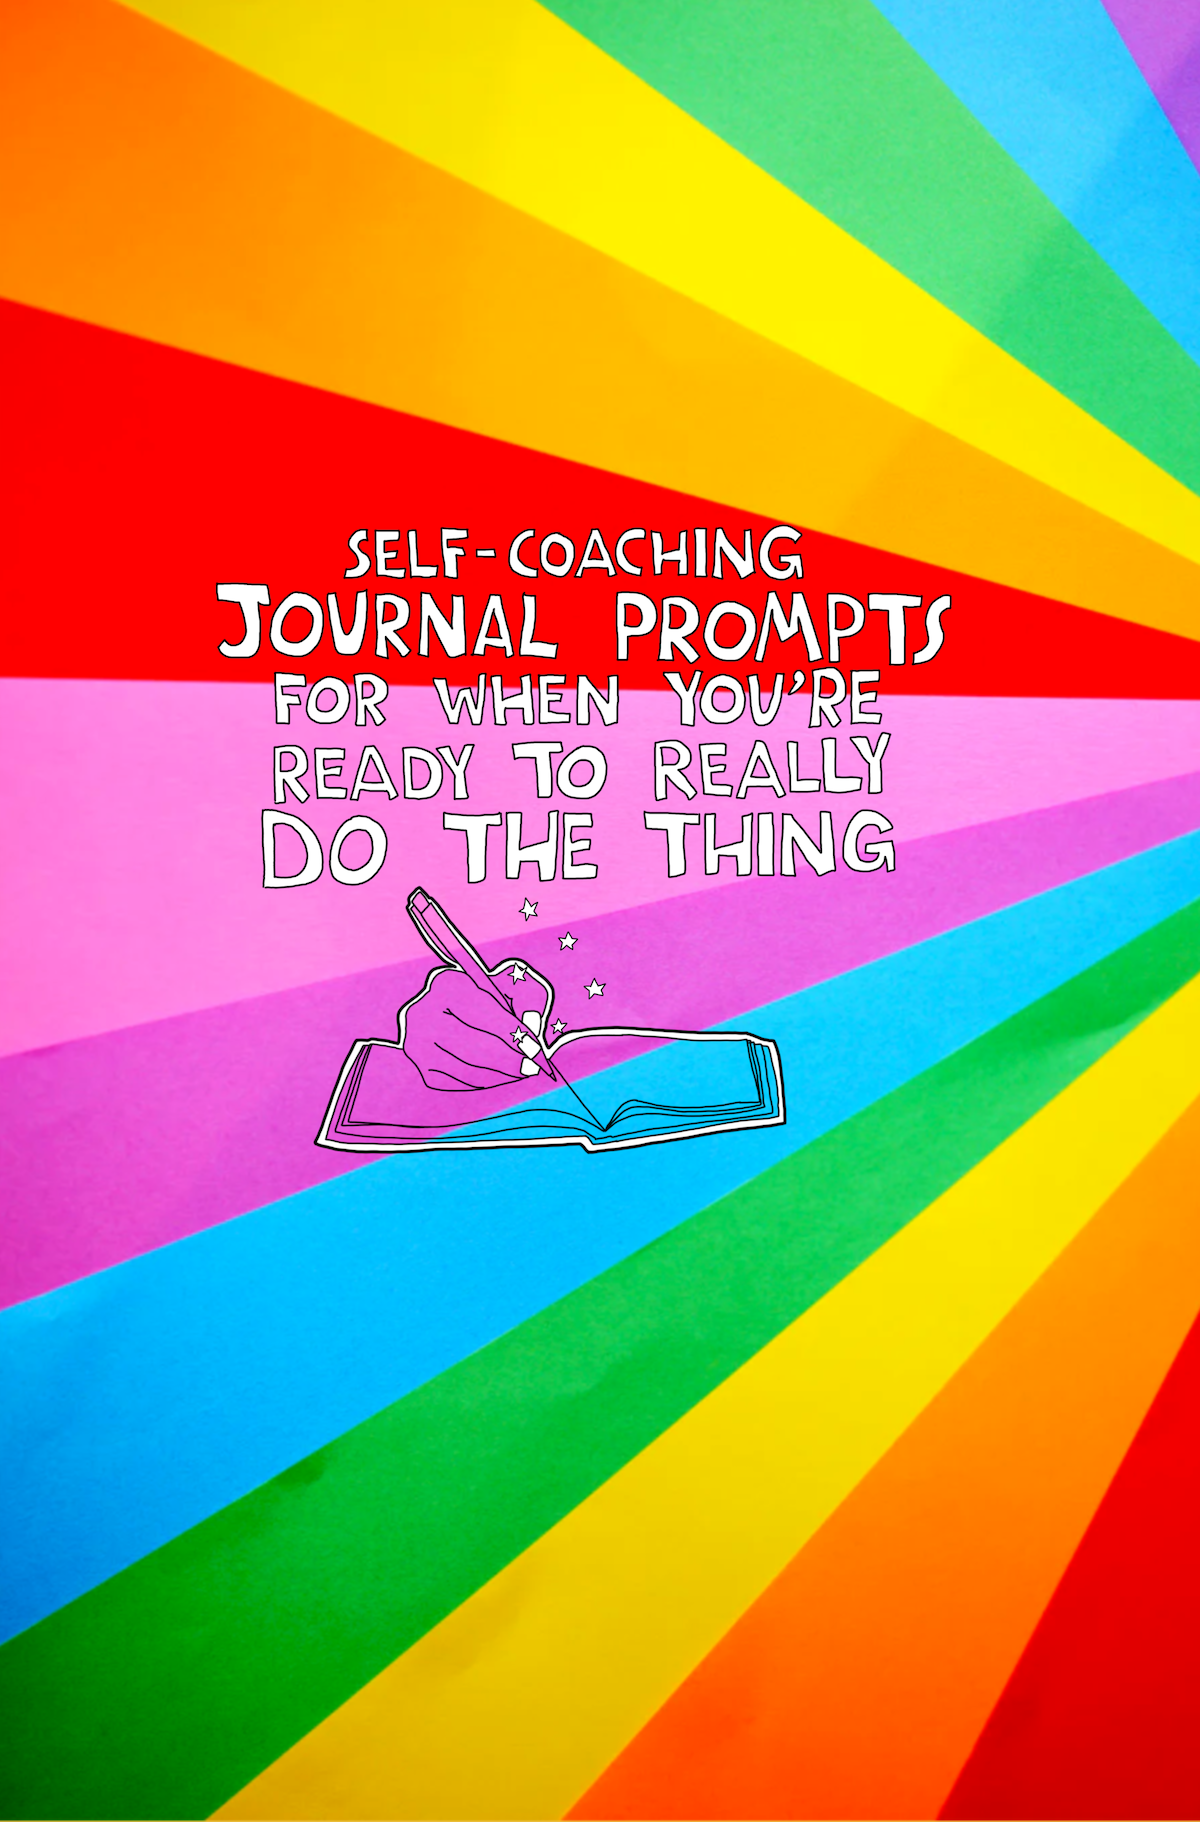 Self-coaching journal prompts for when you’re ready to really DO THE THING